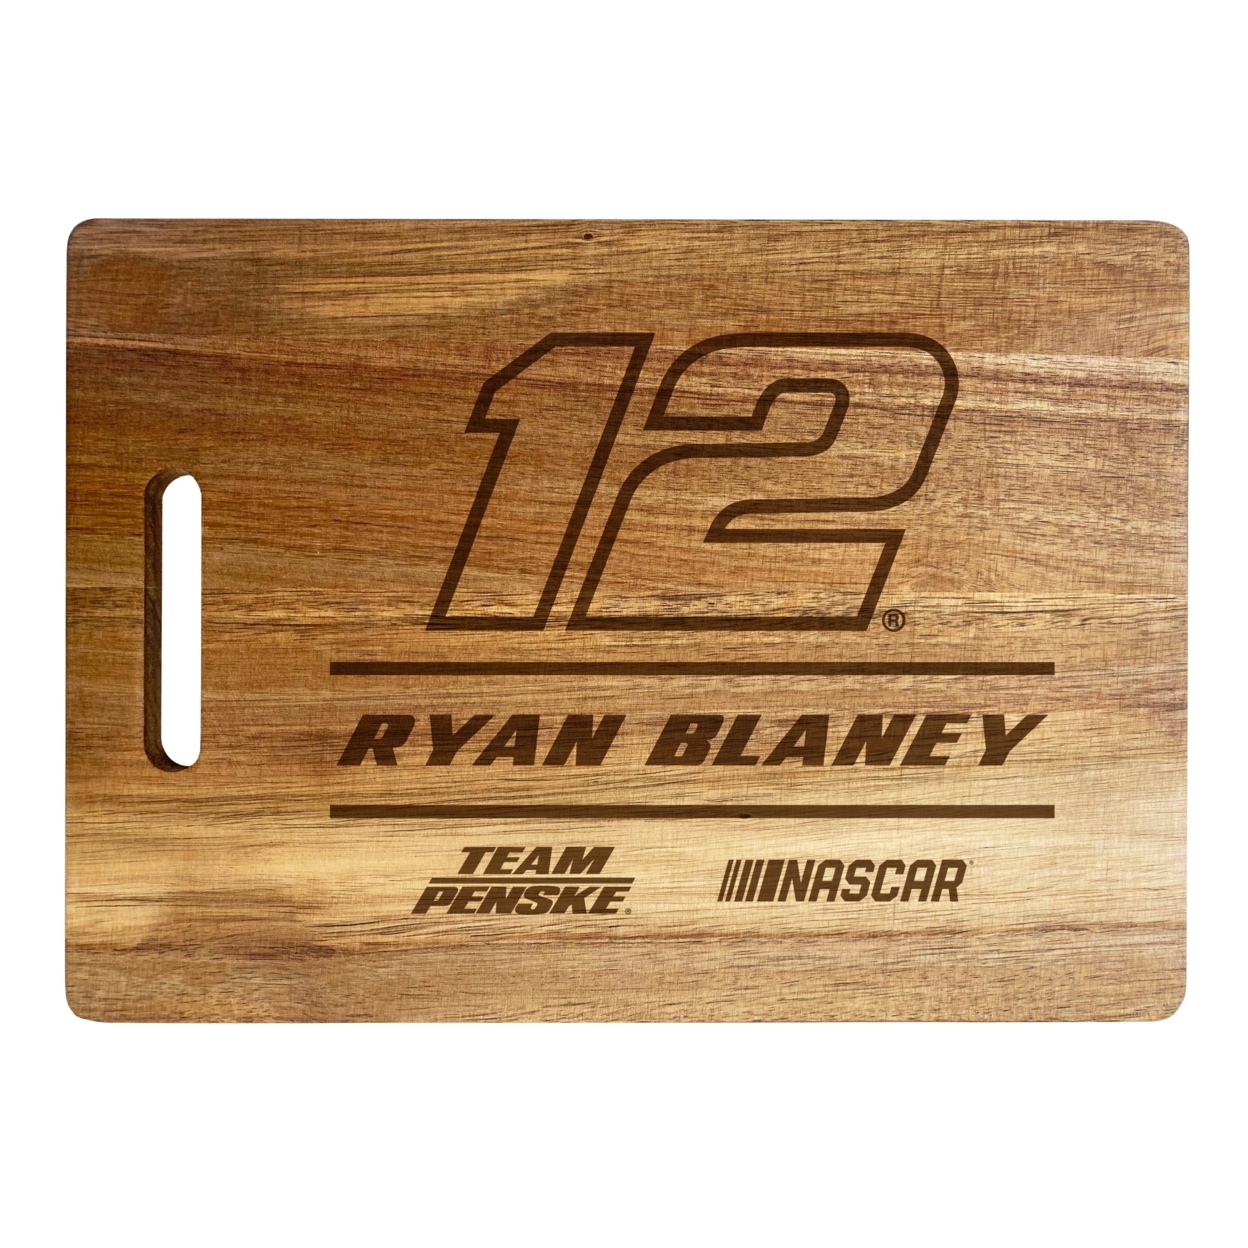 #12 Ryan Blaney NASCAR Officially Licensed Engraved Wooden Cutting Board